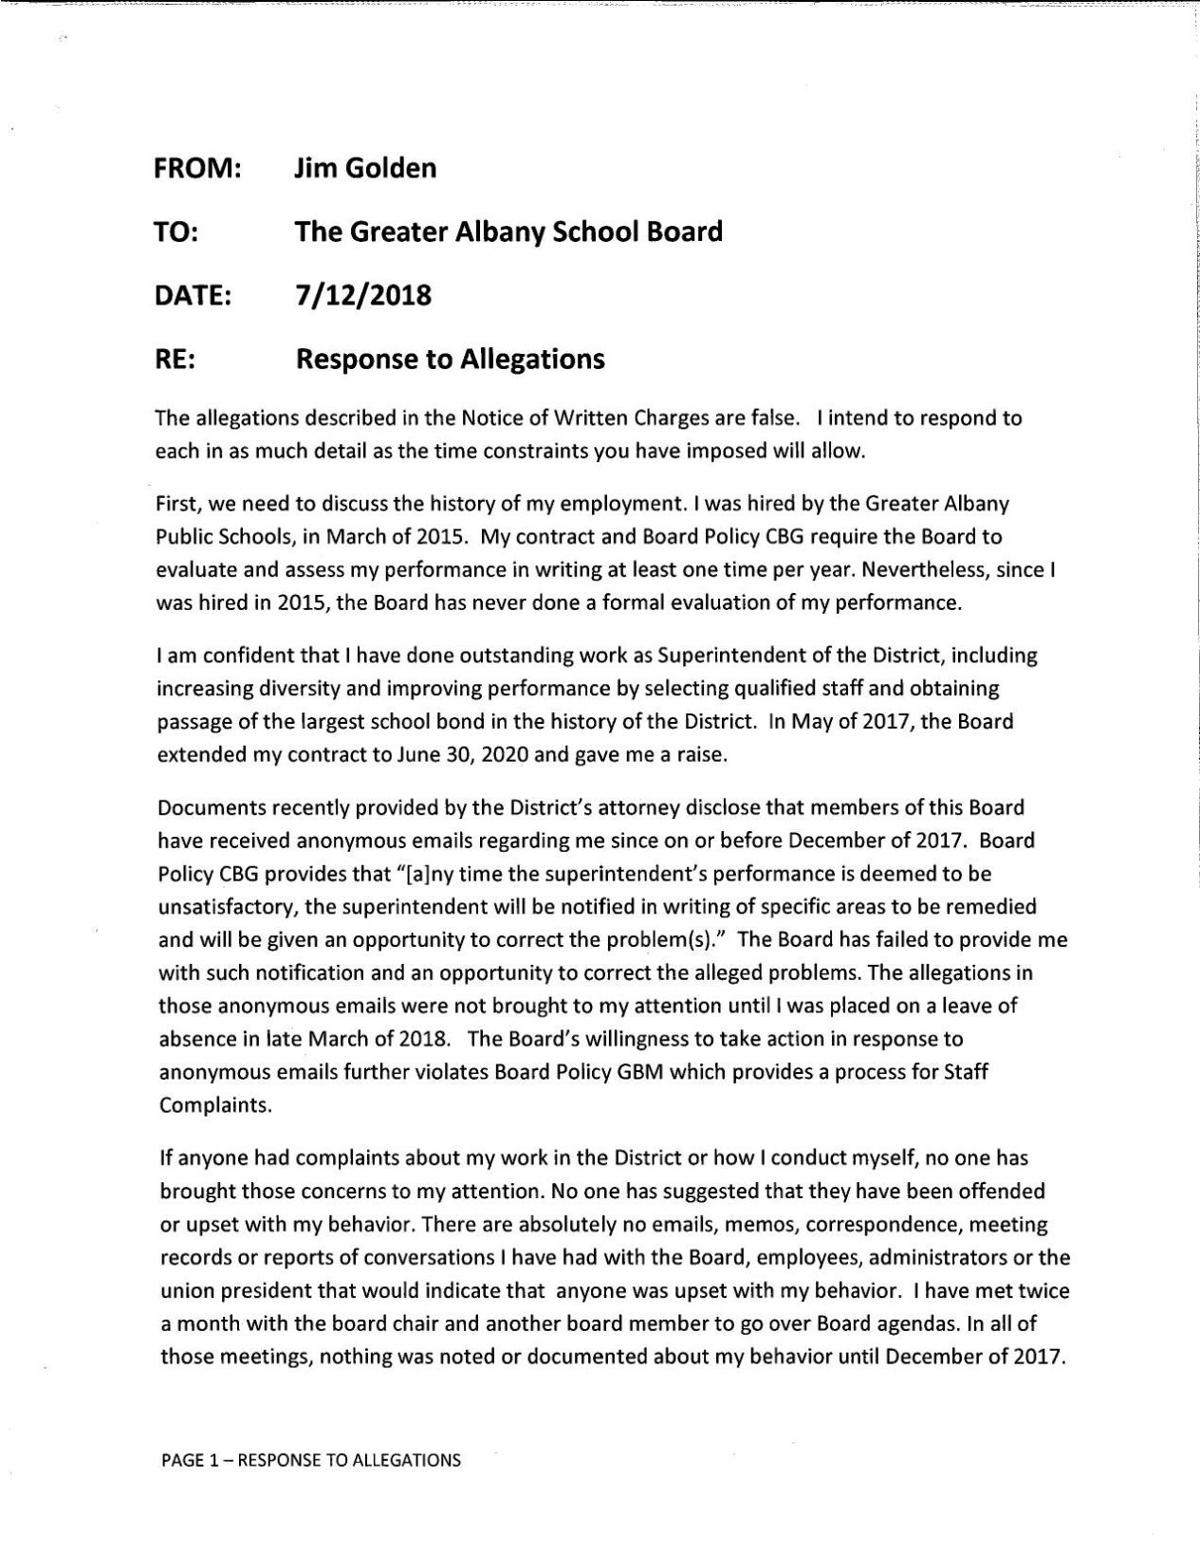 Golden - Response to Allegations 07-12-18.pdf ...